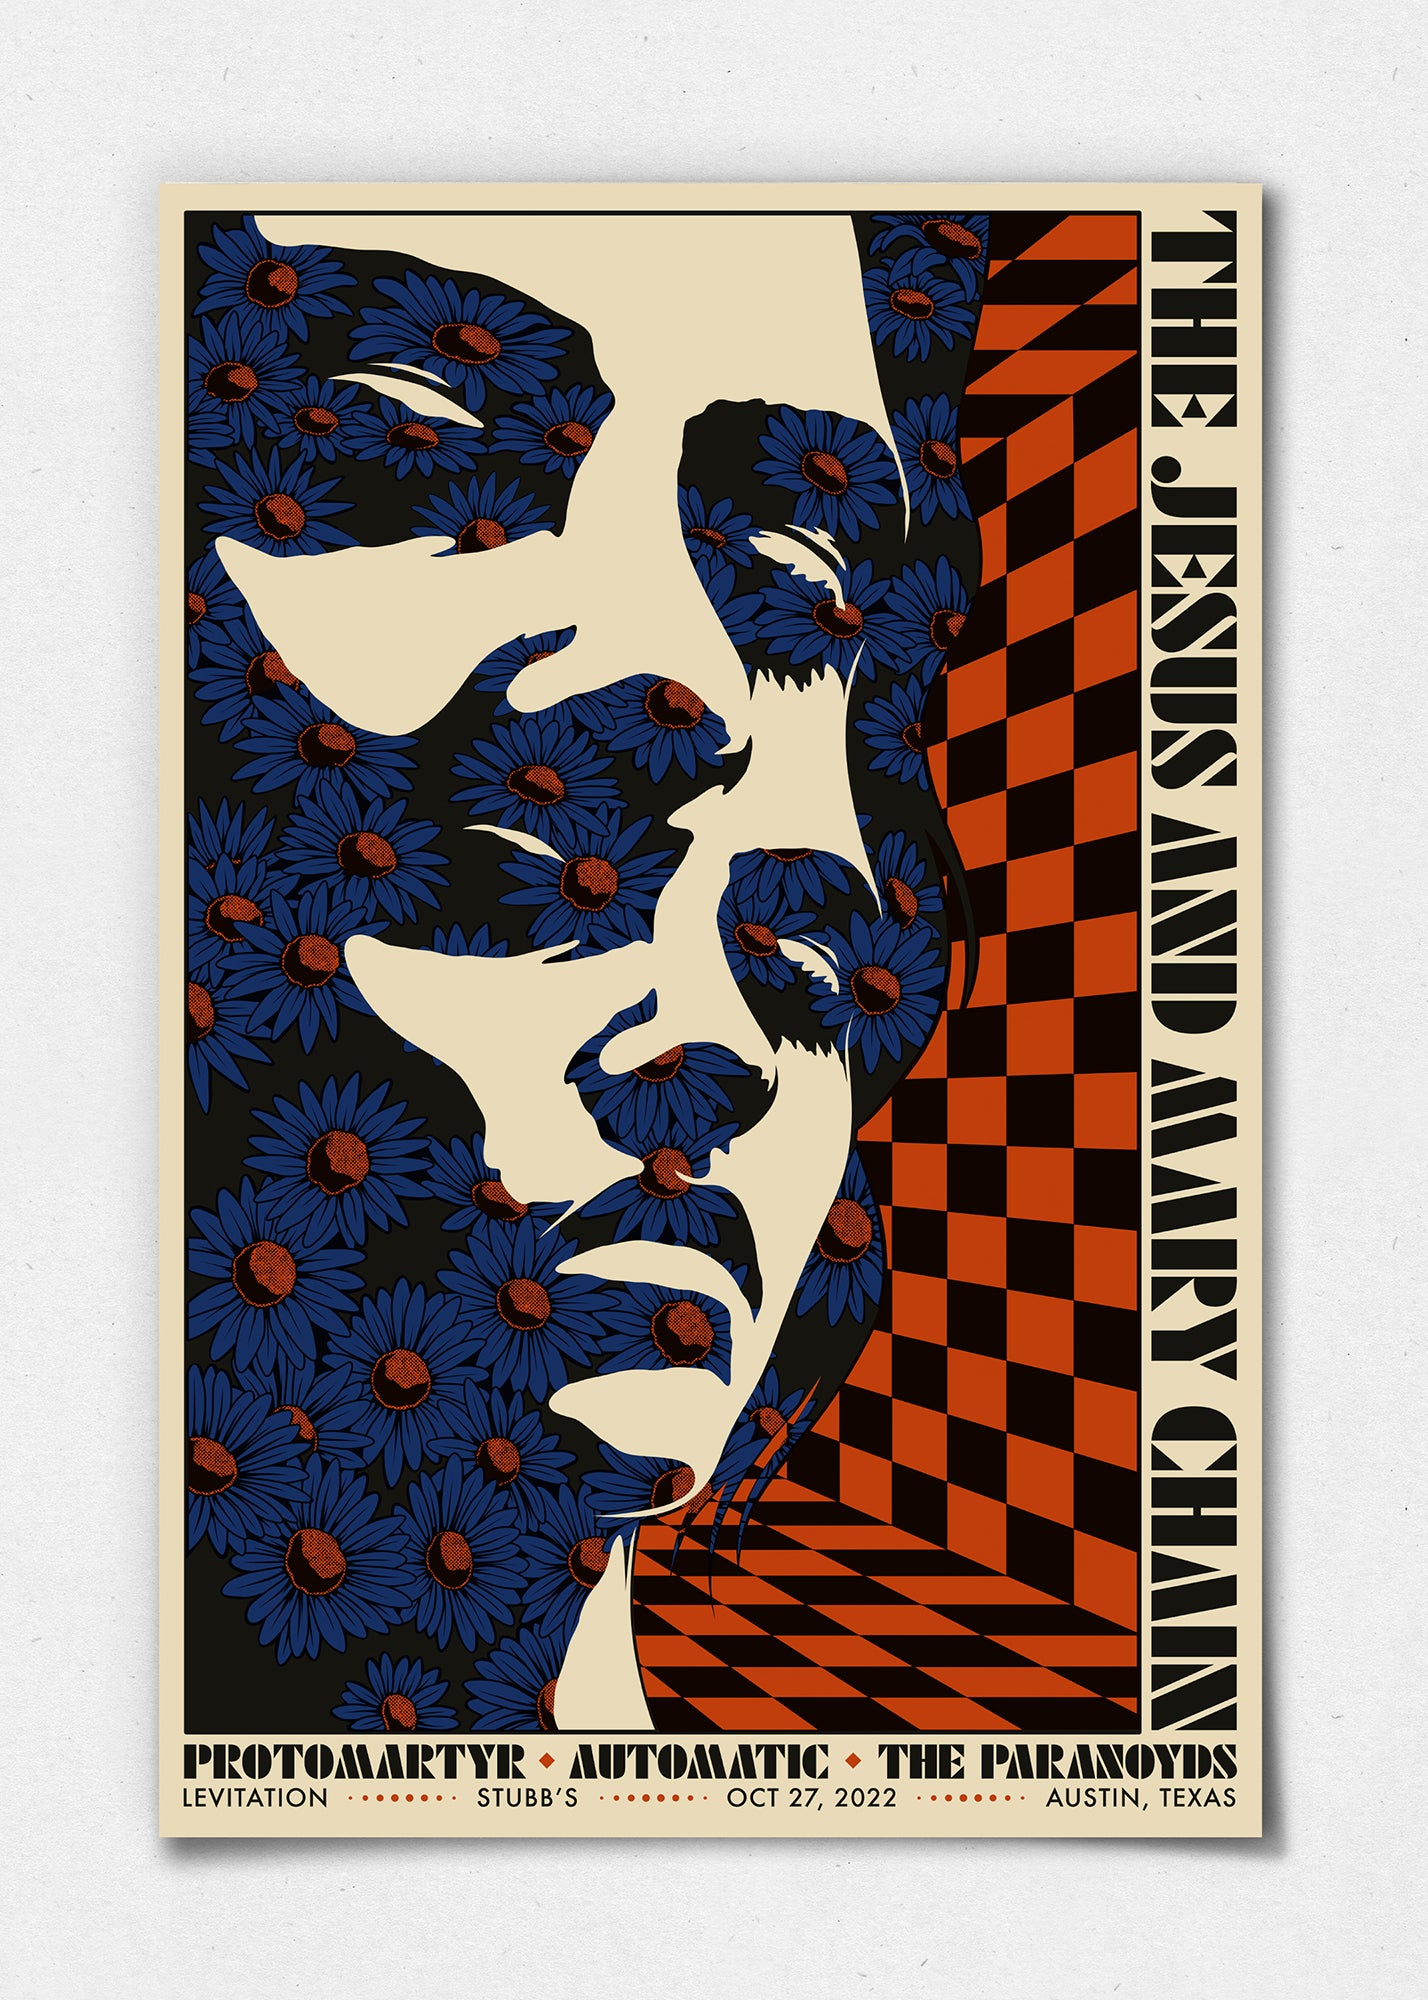 Smuk krone arkiv Jesus and the Mary Chain Poster by Simon Berndt – LEVITATION